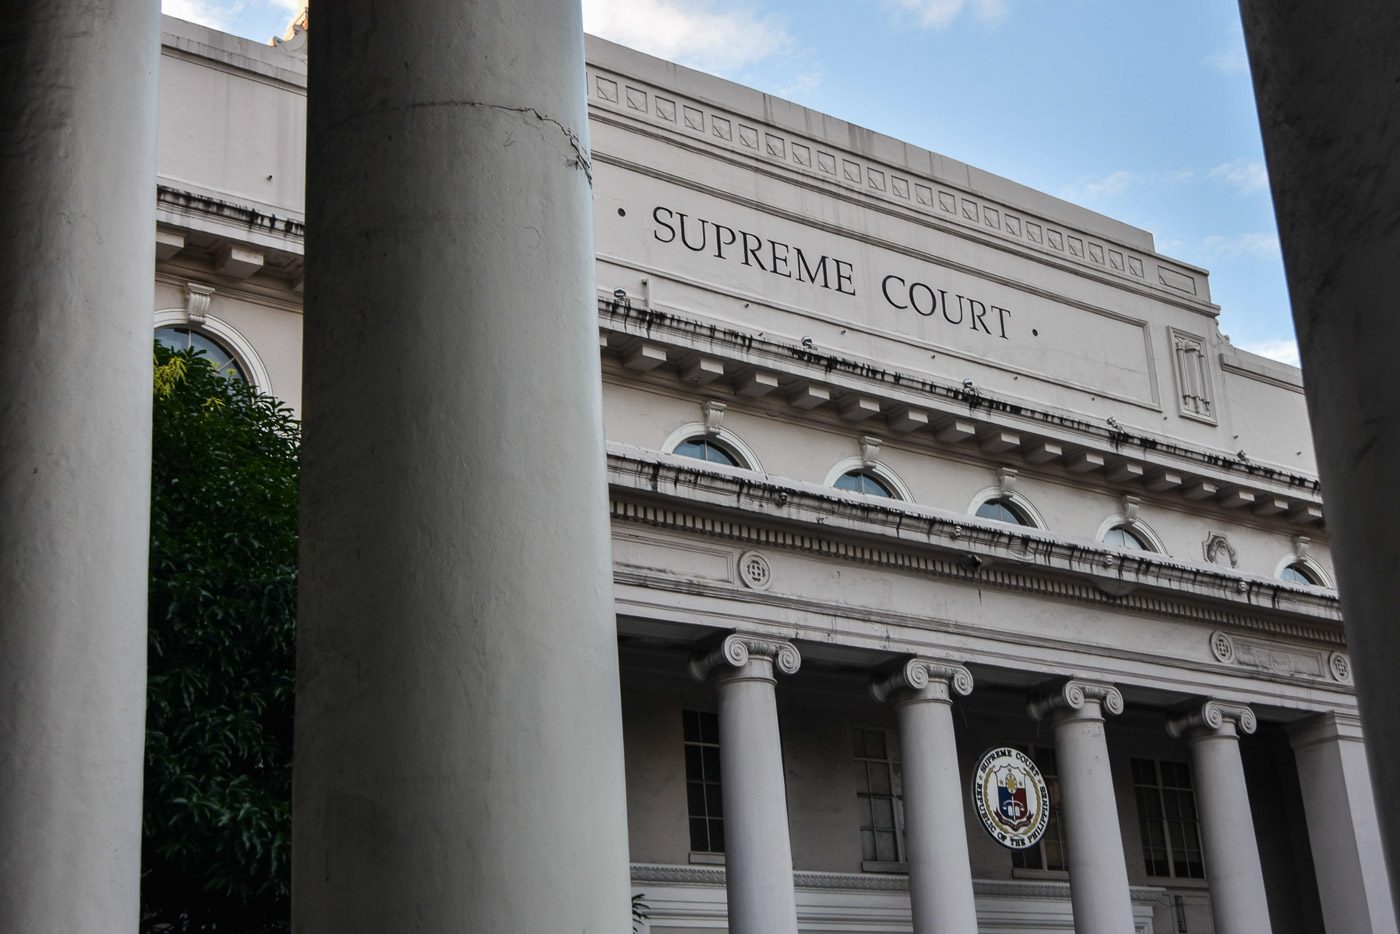 Who voted for Duterte in the Supreme Court?